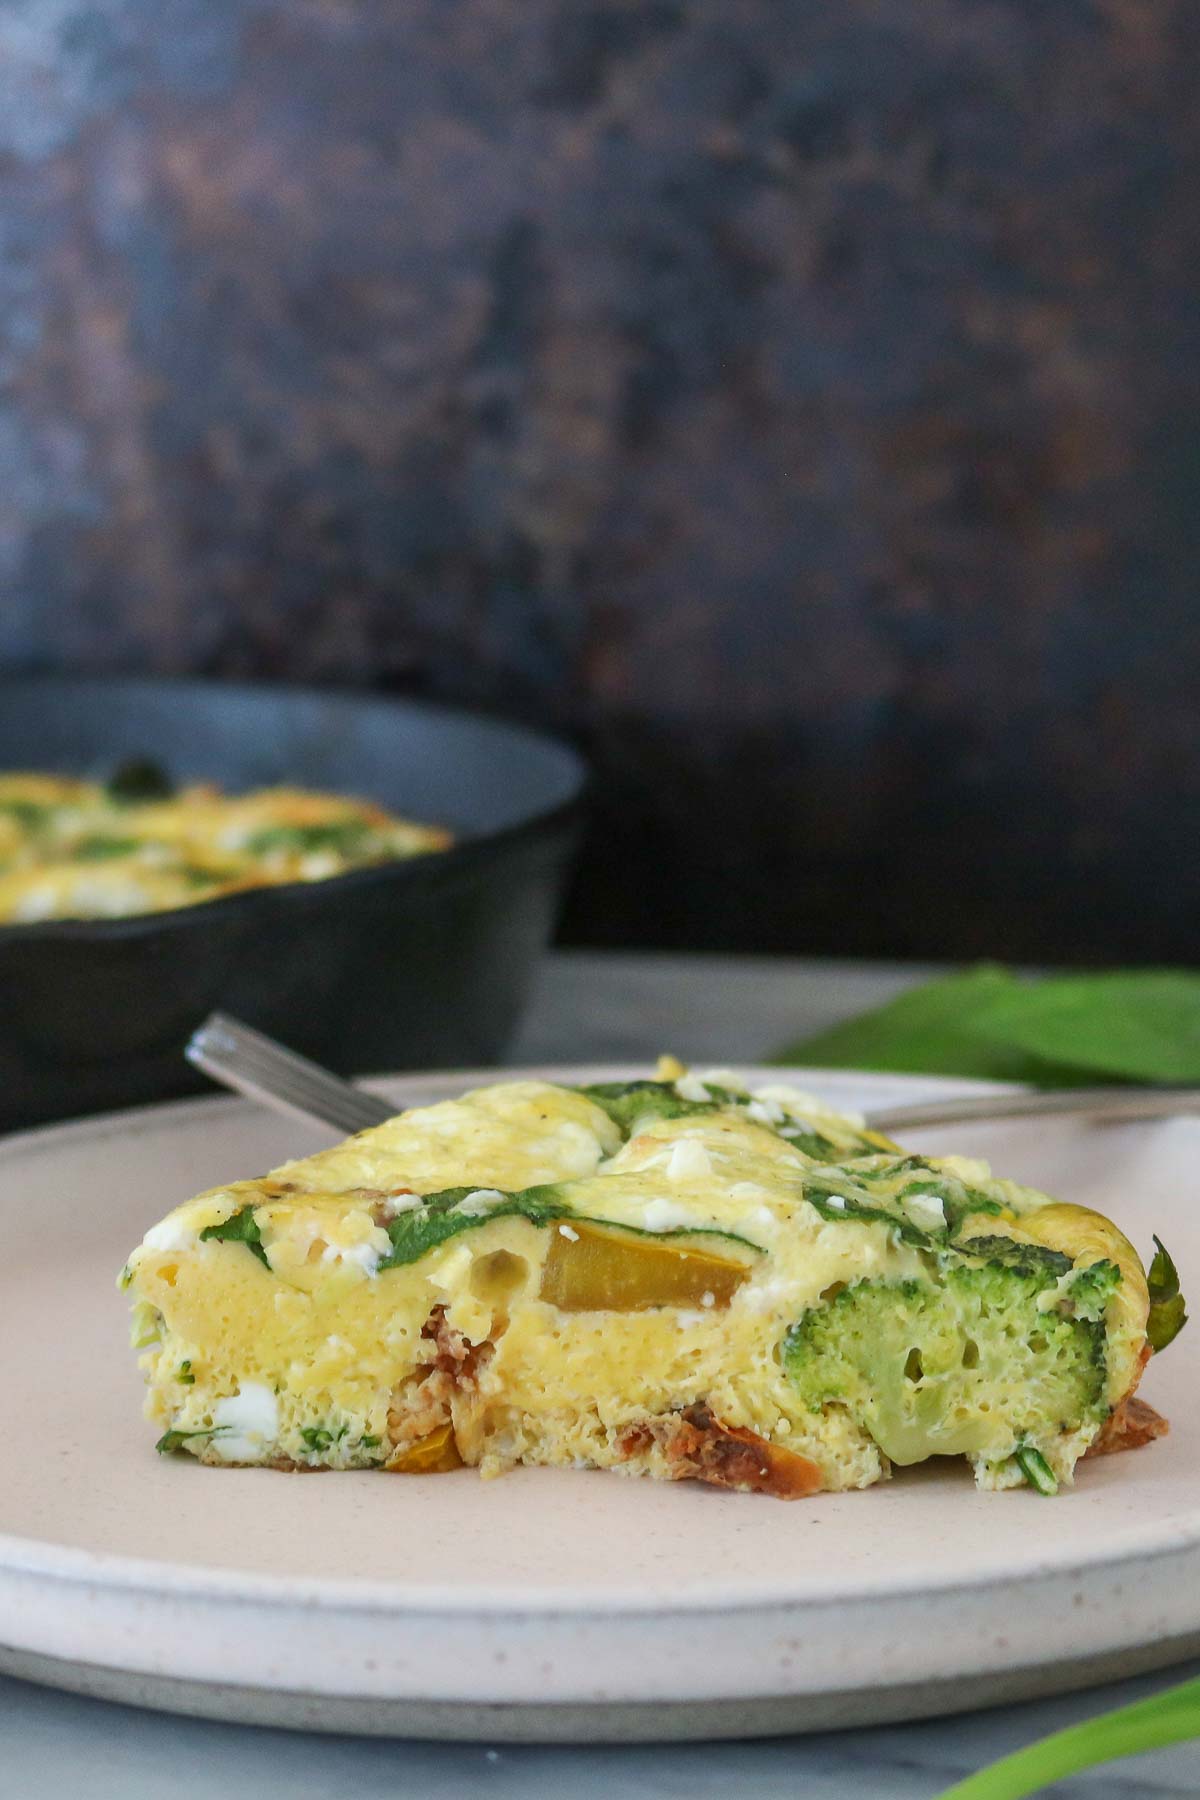 Slice of frittata on a plate.